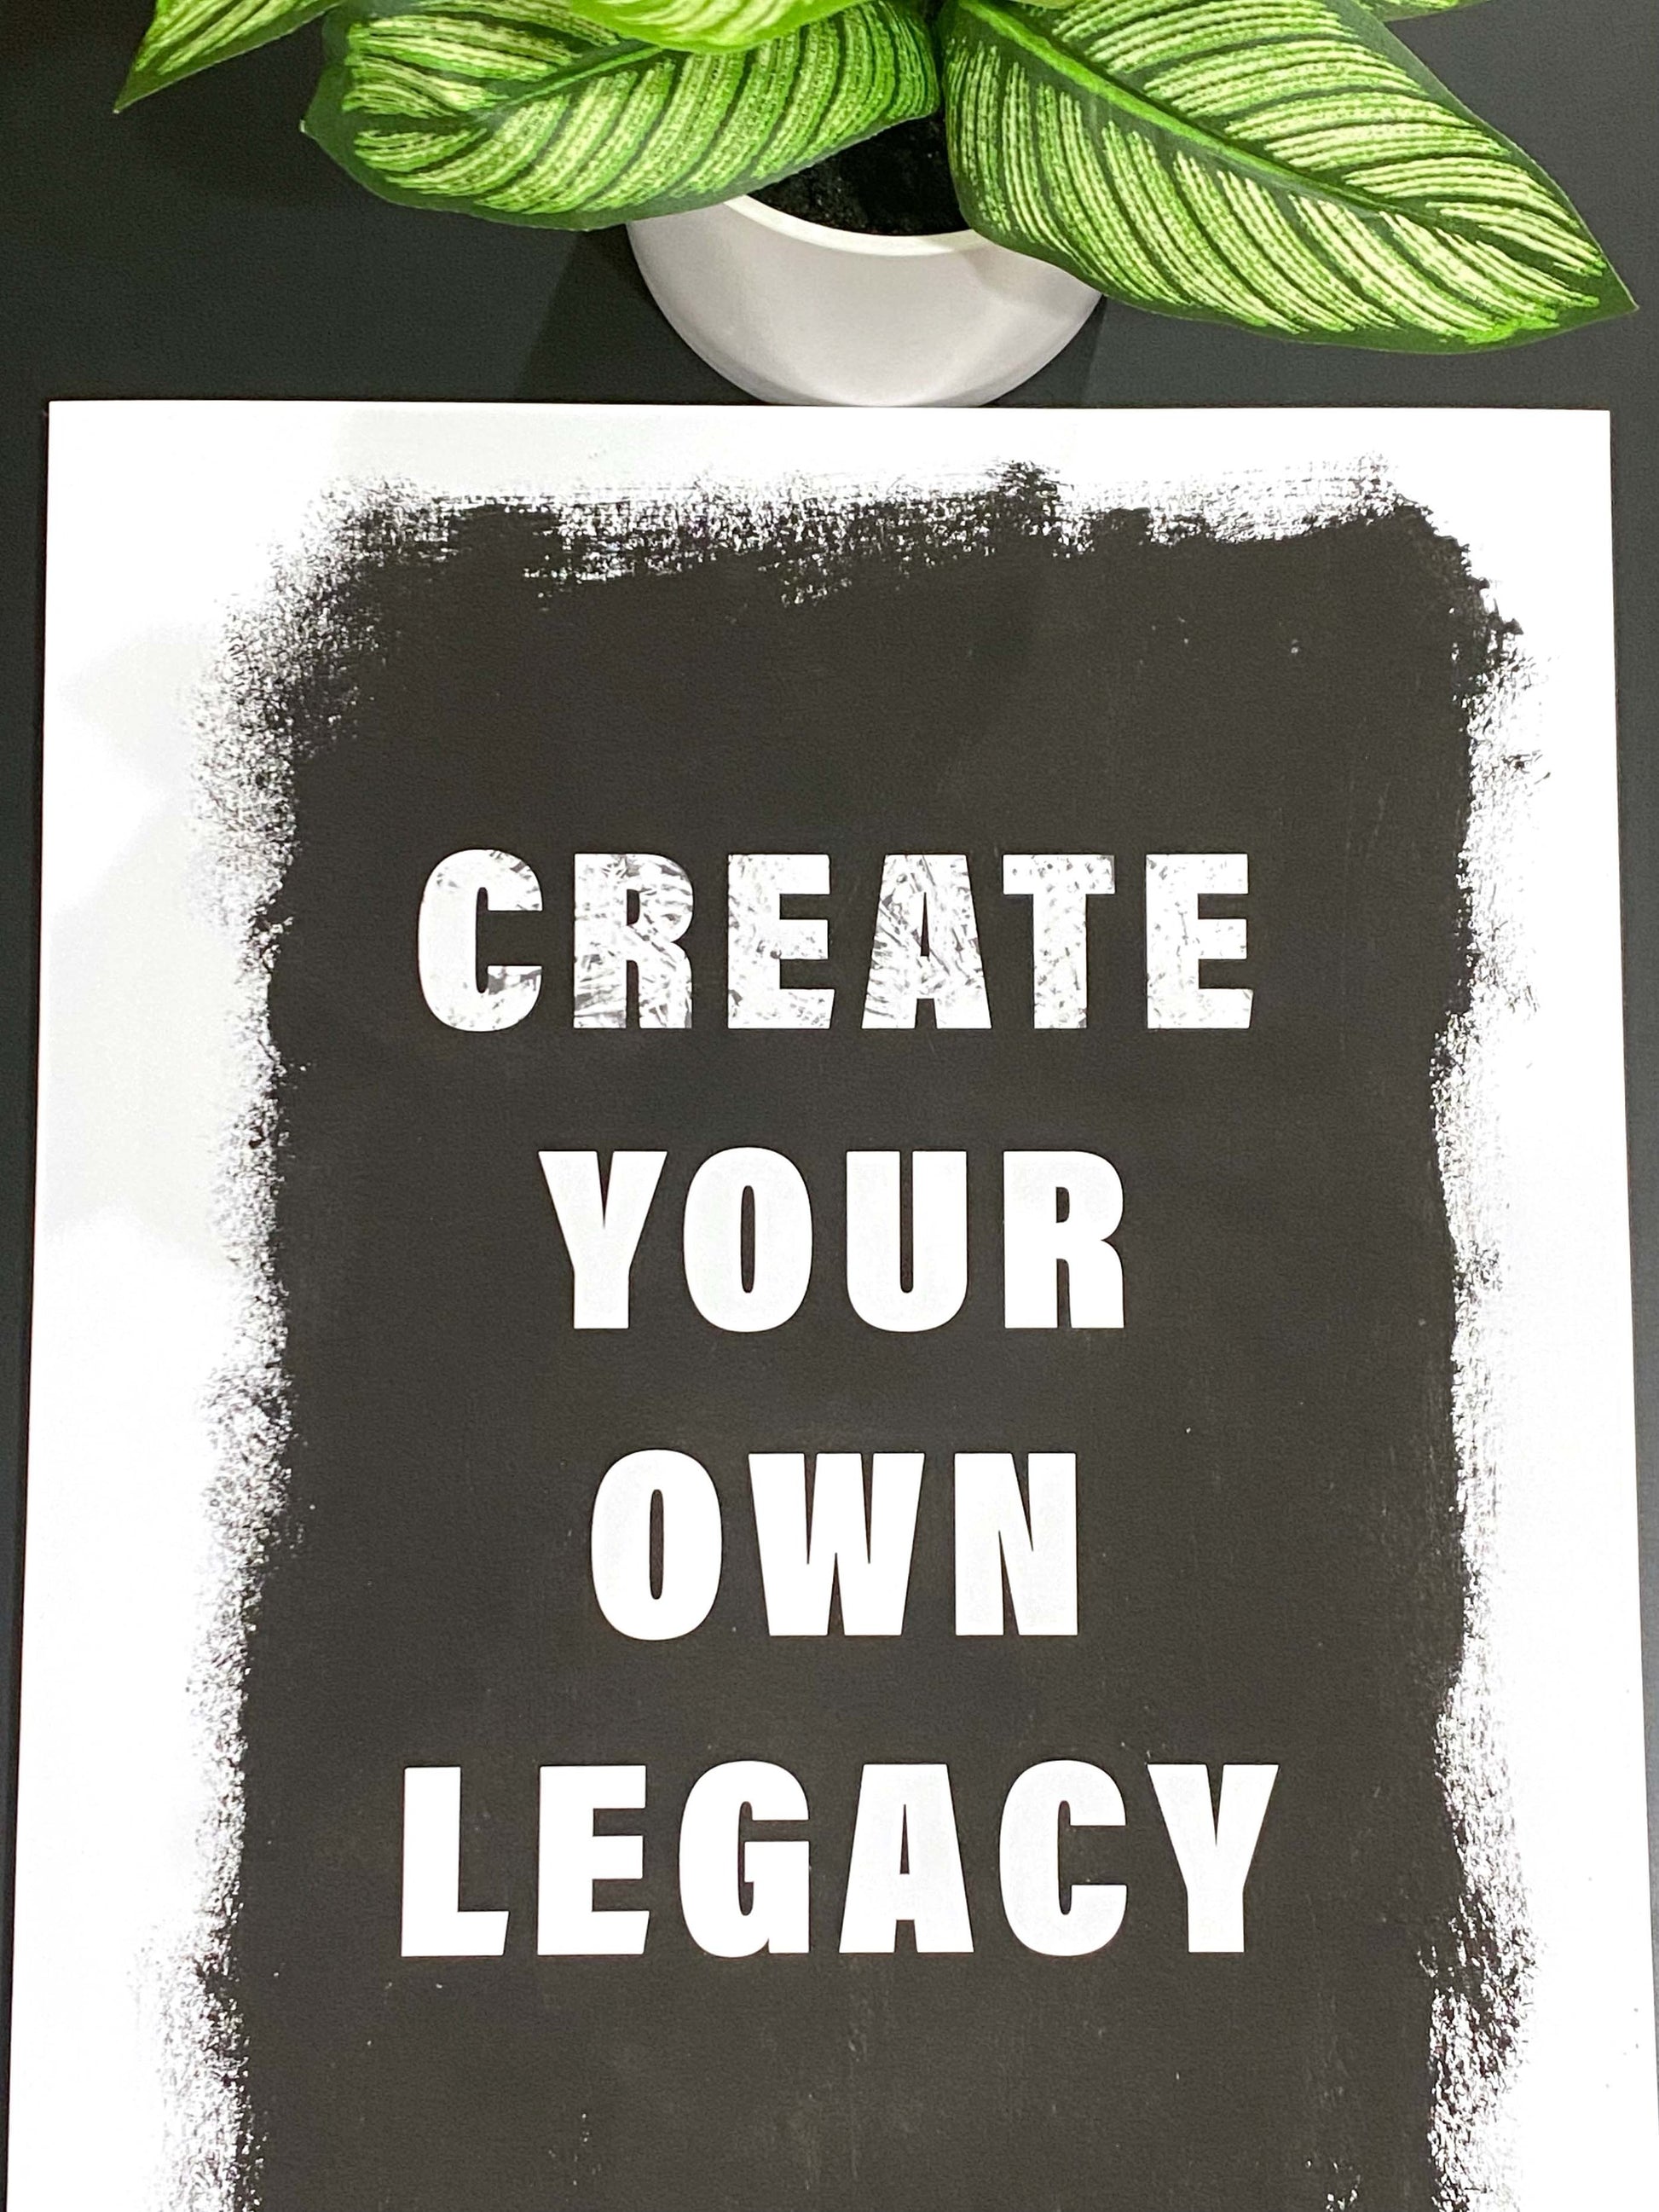 Create Your Own Legacy 11x14” typography inspirational quote, black and white art print from Goods Made By Digitrillnana, Ashley Fletcher. Perfect for home decor, wall art, art prints, and more! Black Woman Owned.